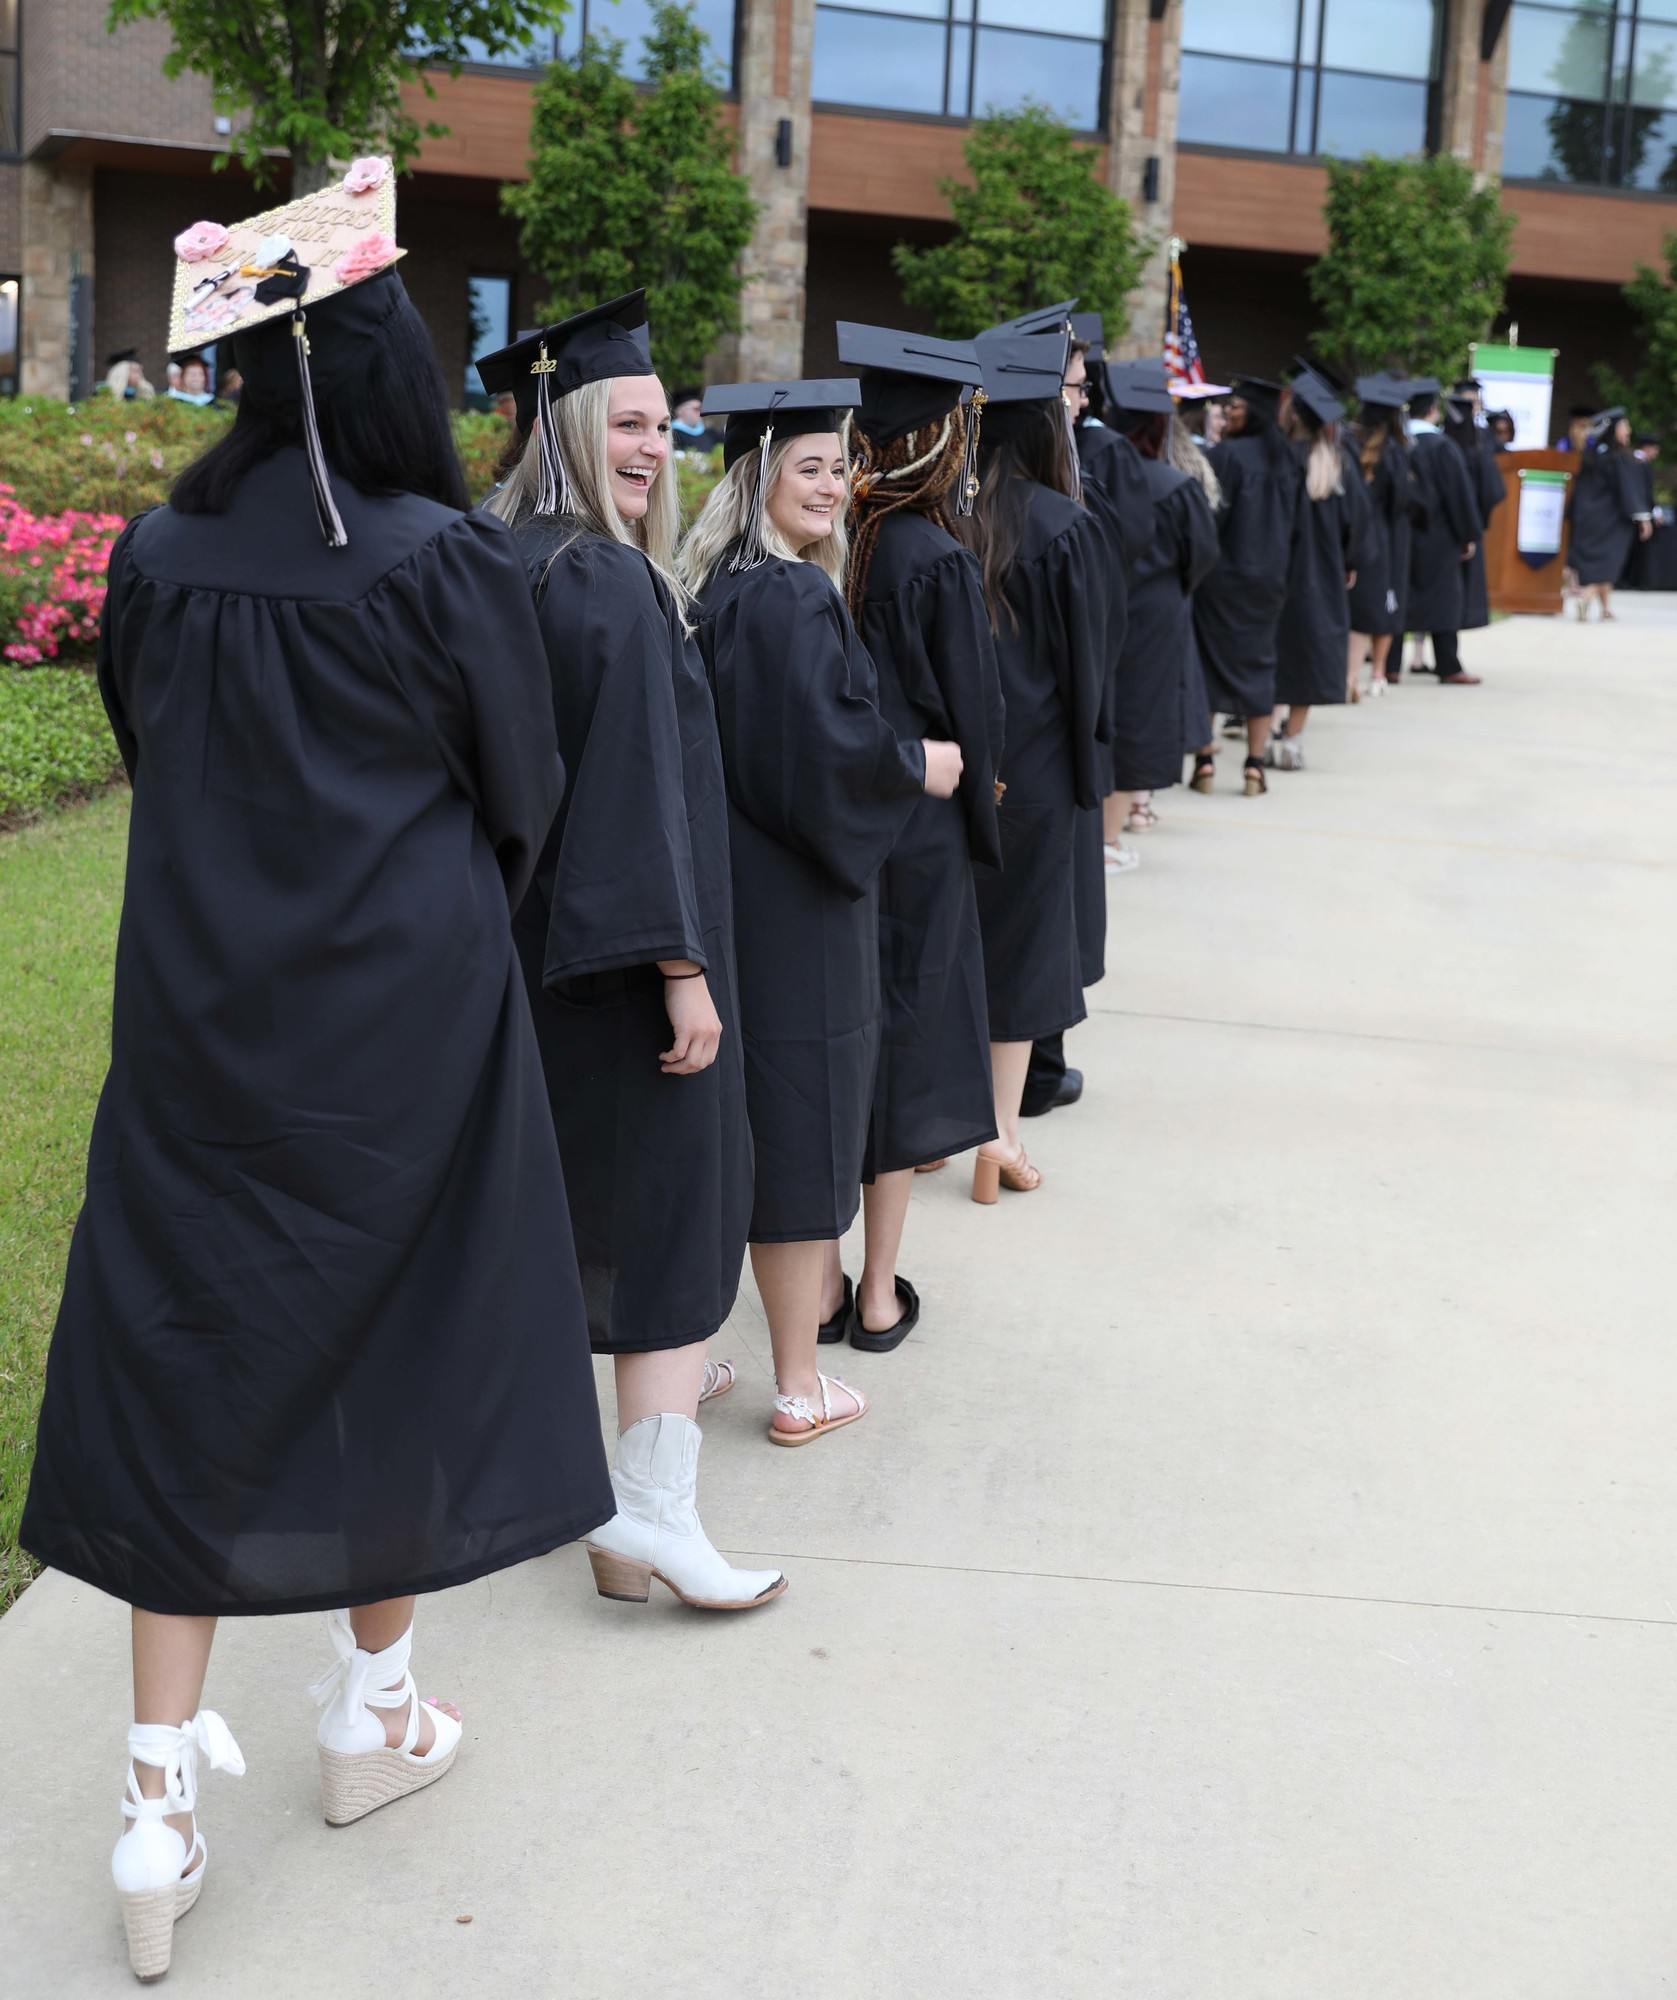 Graduates at 56th Annual Commencement Ceremony